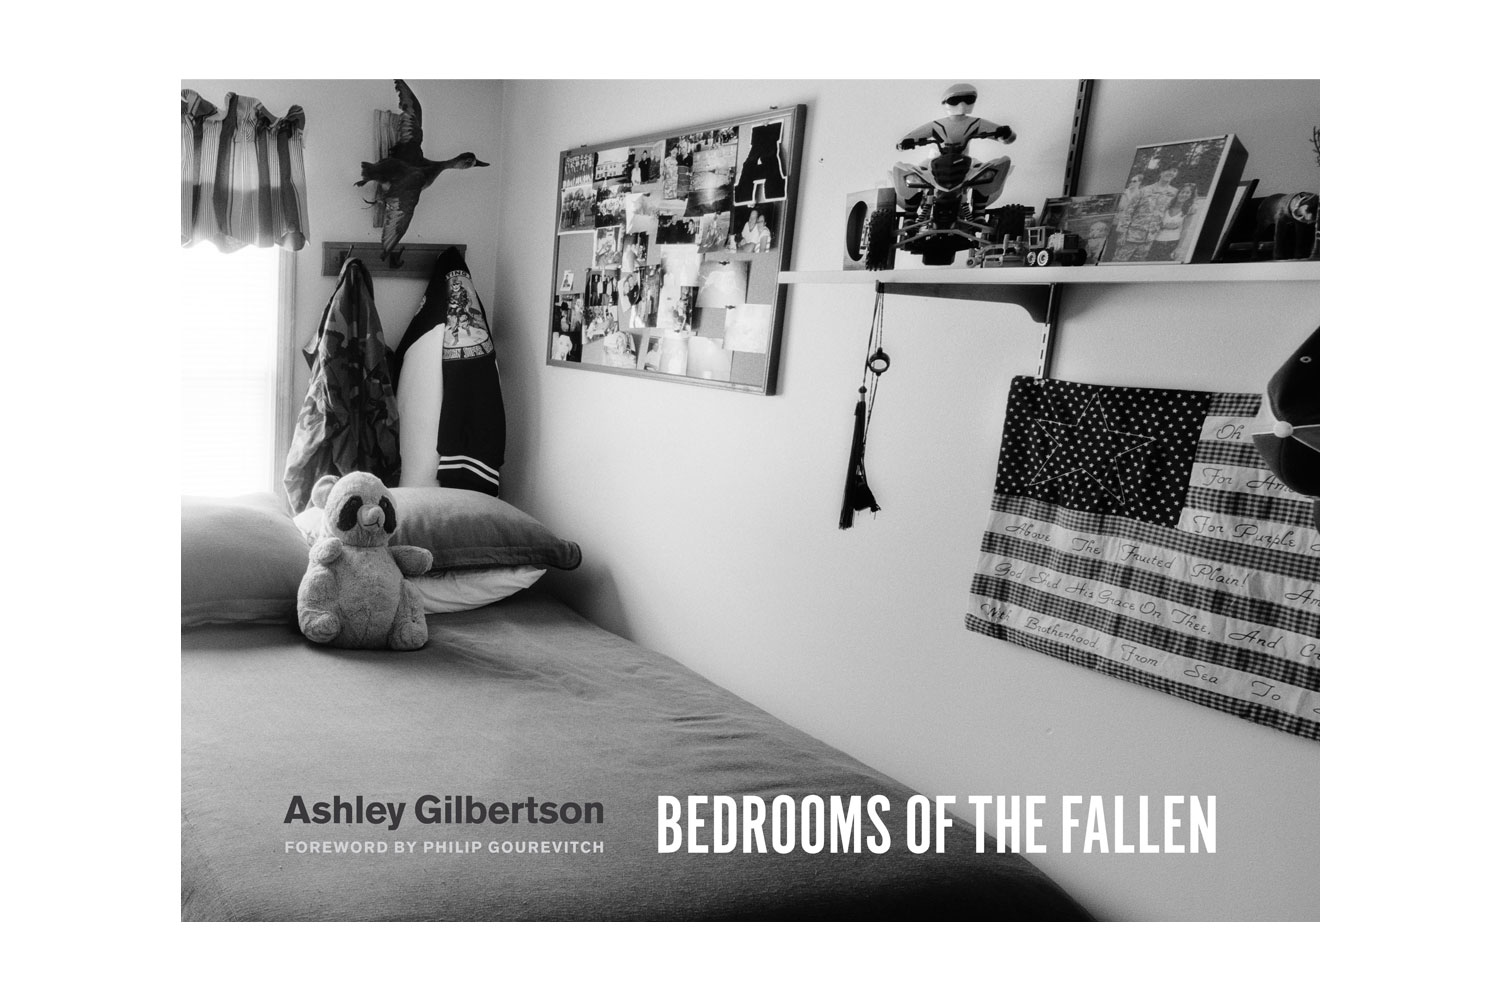 Ashley Gilbertson, Bedrooms of the Fallen